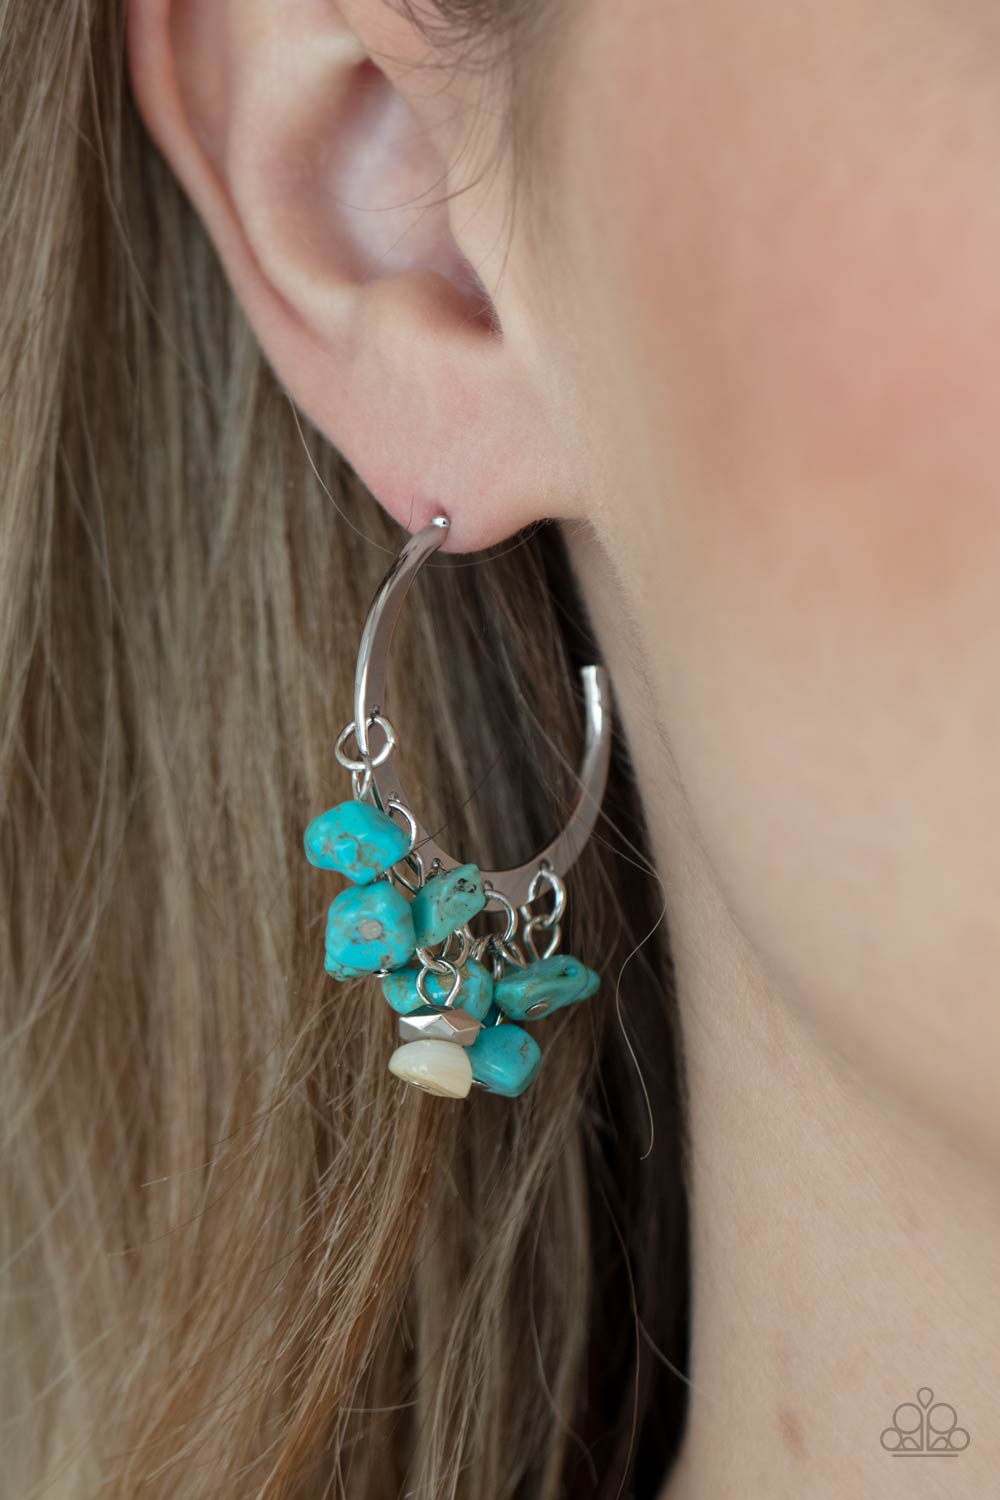 Gorgeously Grounding Blue Earring - Paparazzi Accessories  Clusters of turquoise pebbles swing from the bottom of a dainty silver hoop, creating an earthy fringe. A faceted silver and white stone bead swings from the center, adding an ethereal edge. Earring attaches to a standard post fitting. Hoop measures approximately 1 1/4" in diameter.  All Paparazzi Accessories are lead free and nickel free!  Sold as one pair of hoop earrings.